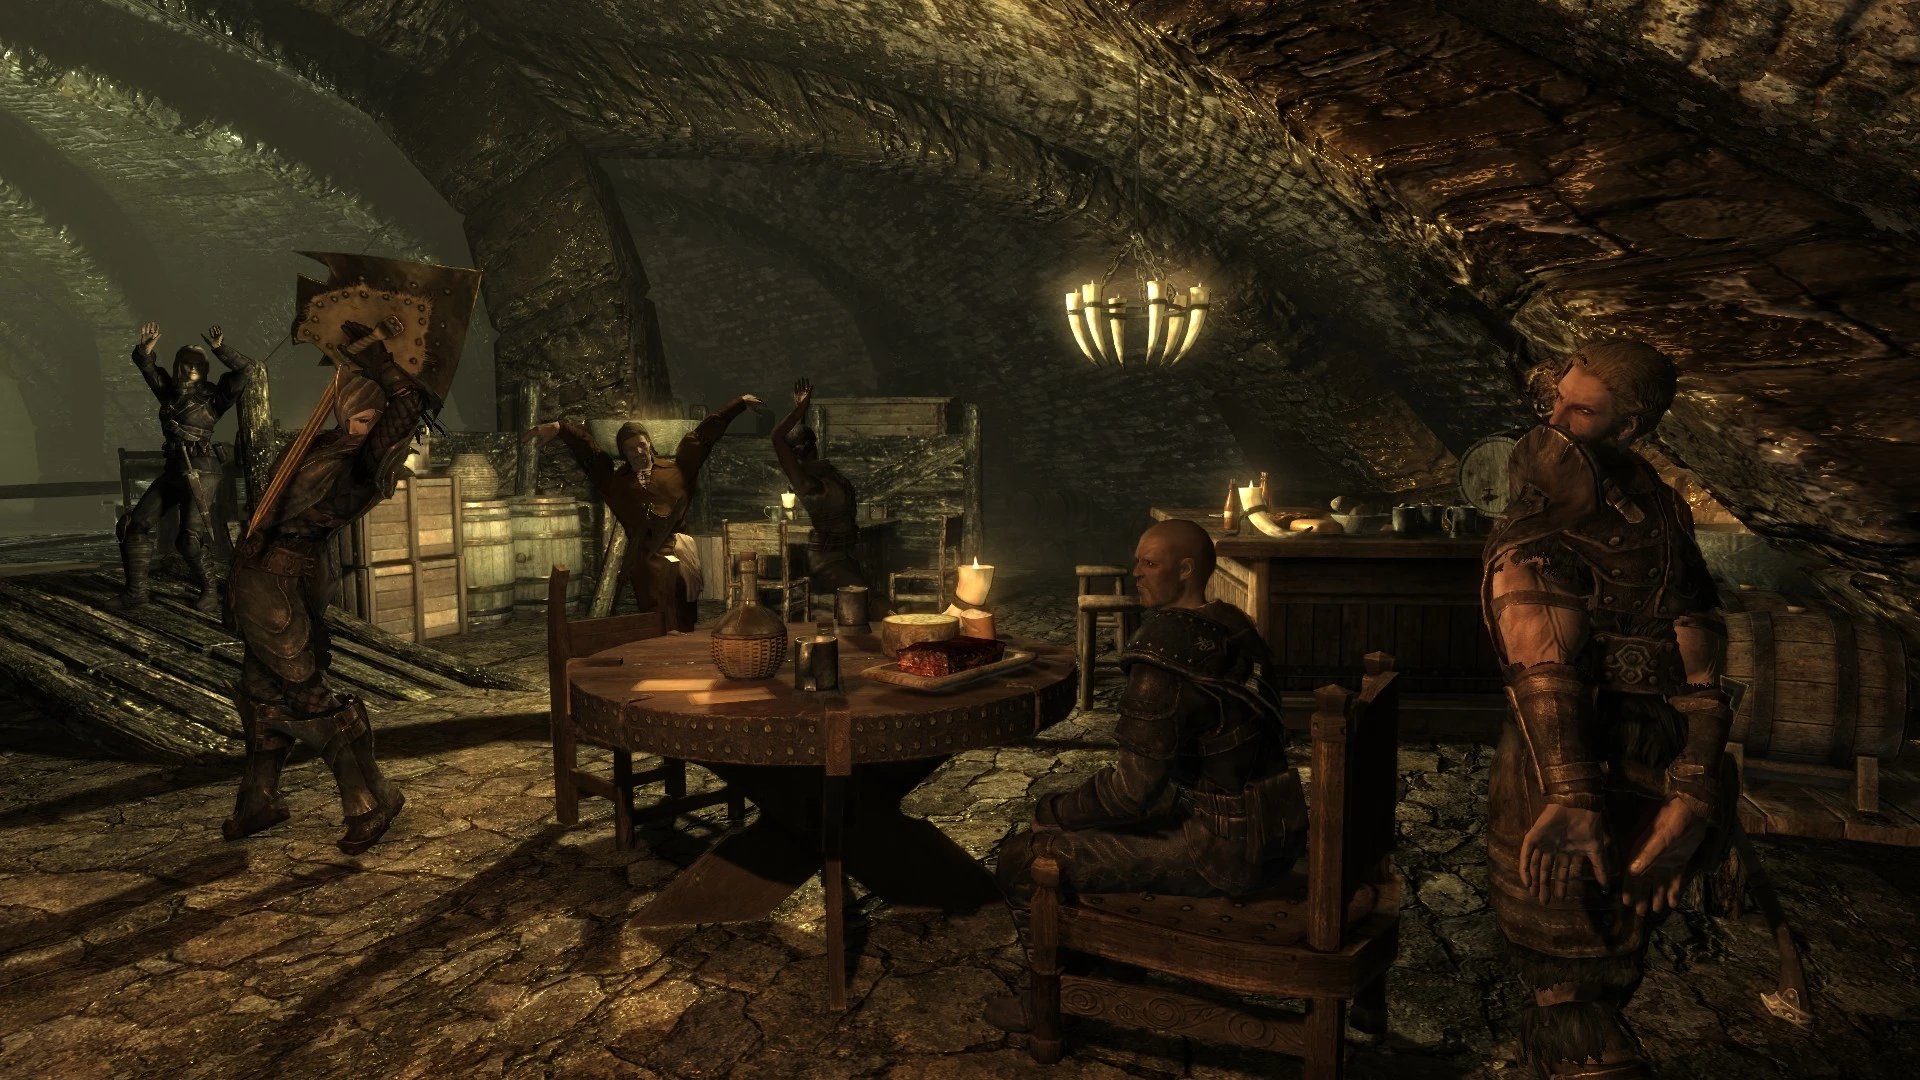 download skyrim workshop mods without owning steam copy of game